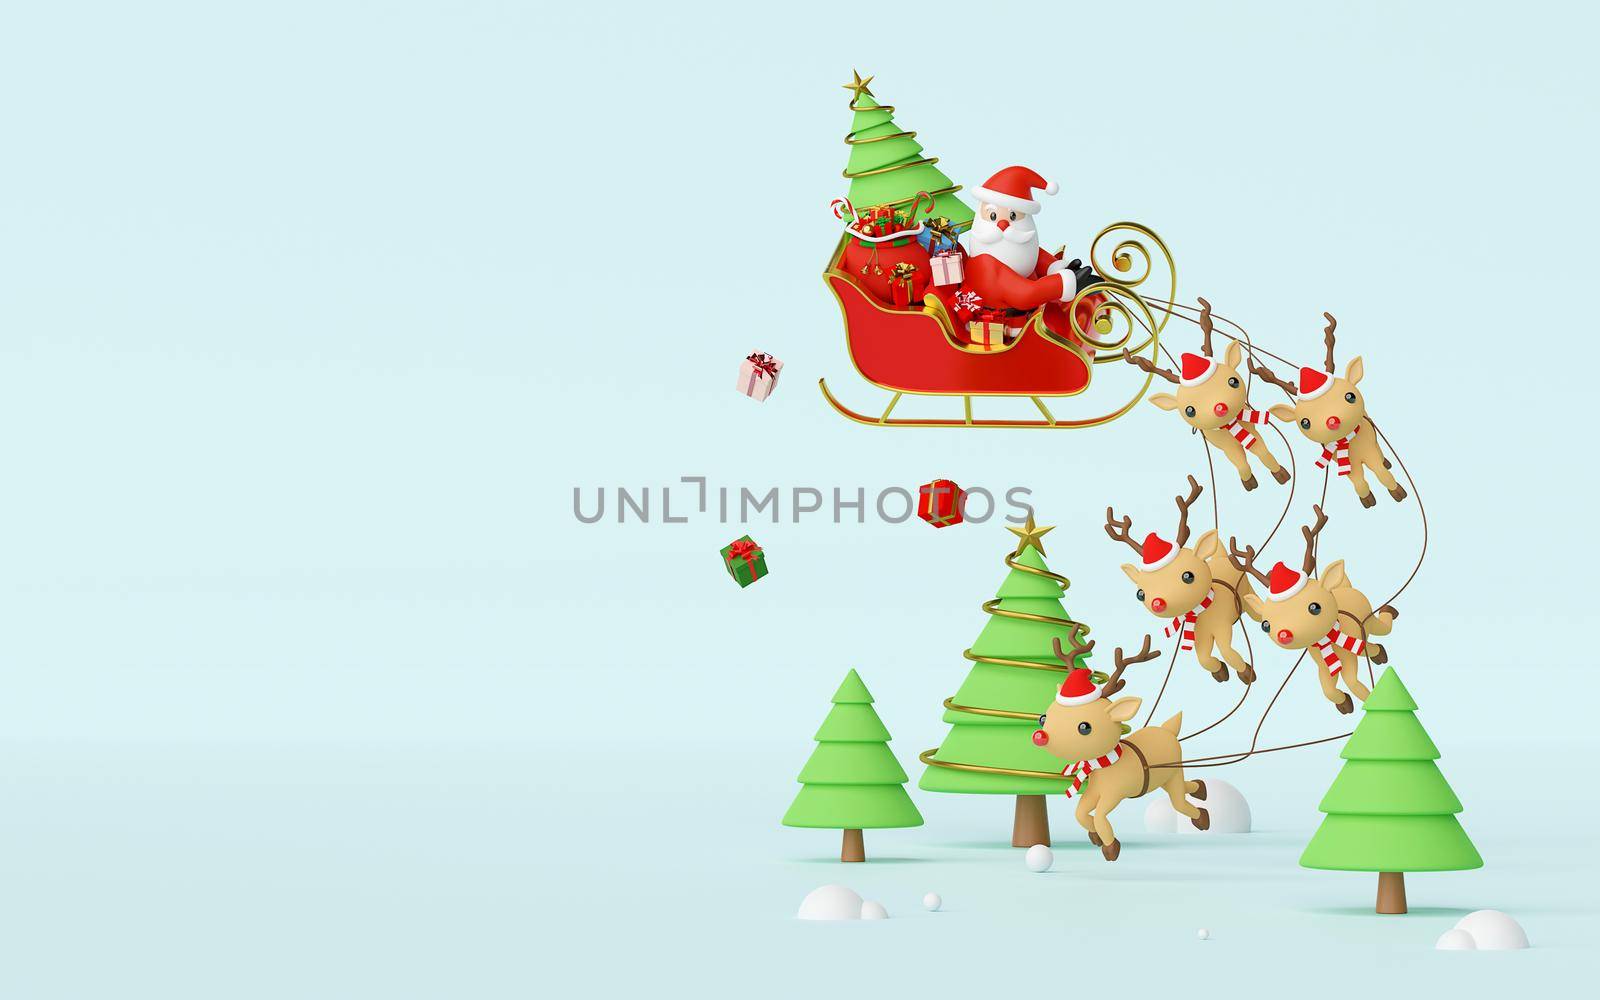 Scene of Santa Claus on a sleigh full of Christmas gifts and pulled by reindeer on a blue background, 3d rendering by nutzchotwarut